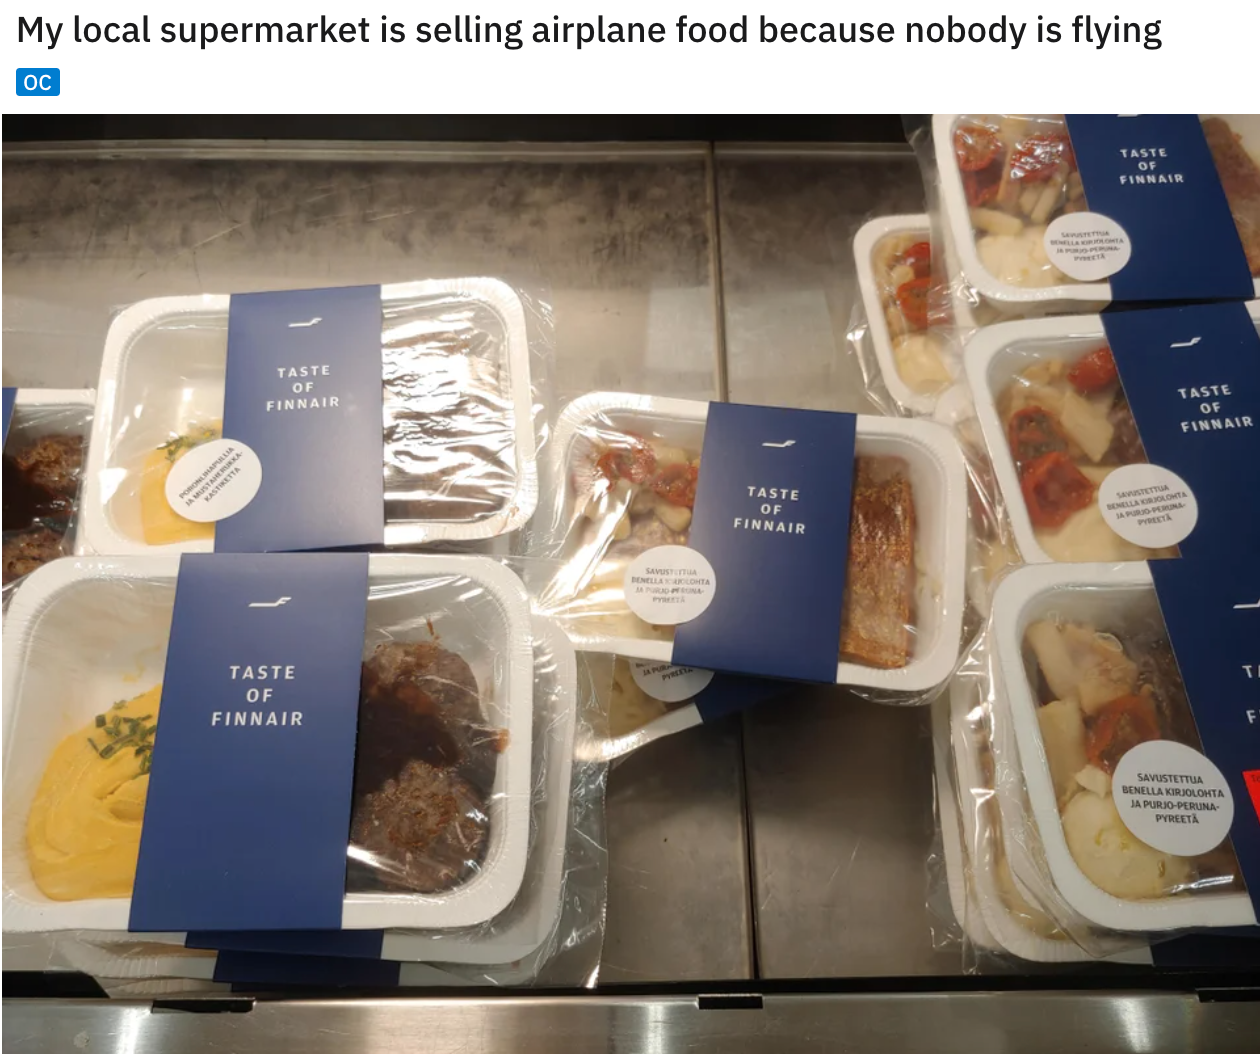 cool and funny pics - My local supermarket is selling airplane food because nobody is flying